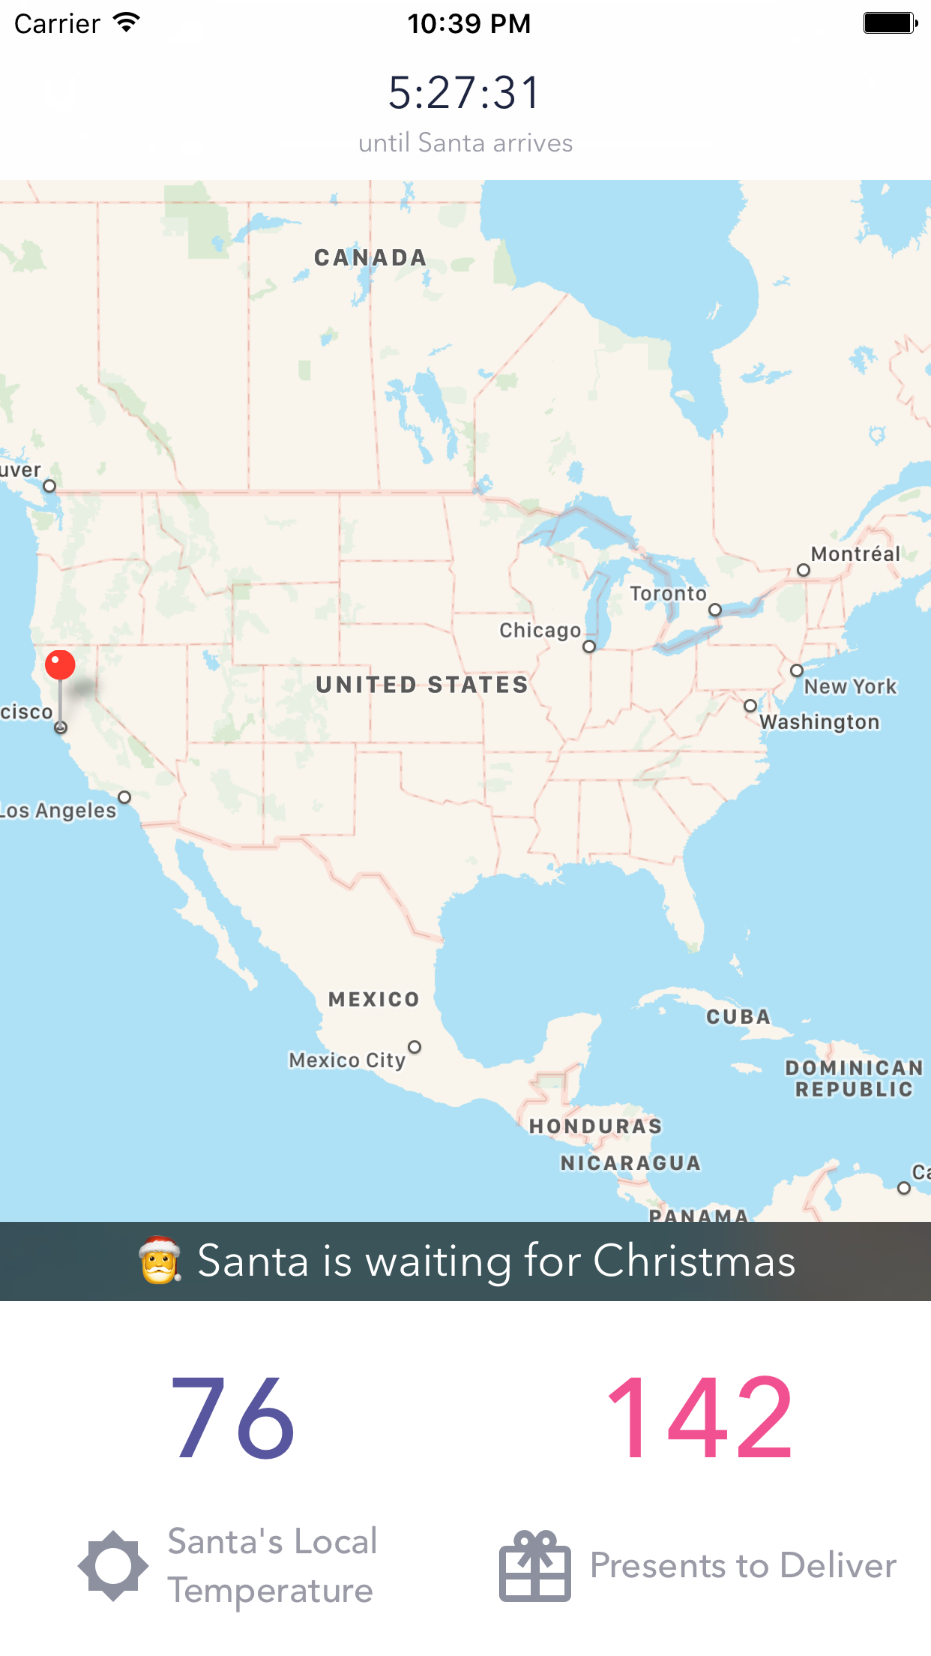 The finished Santa tracking app